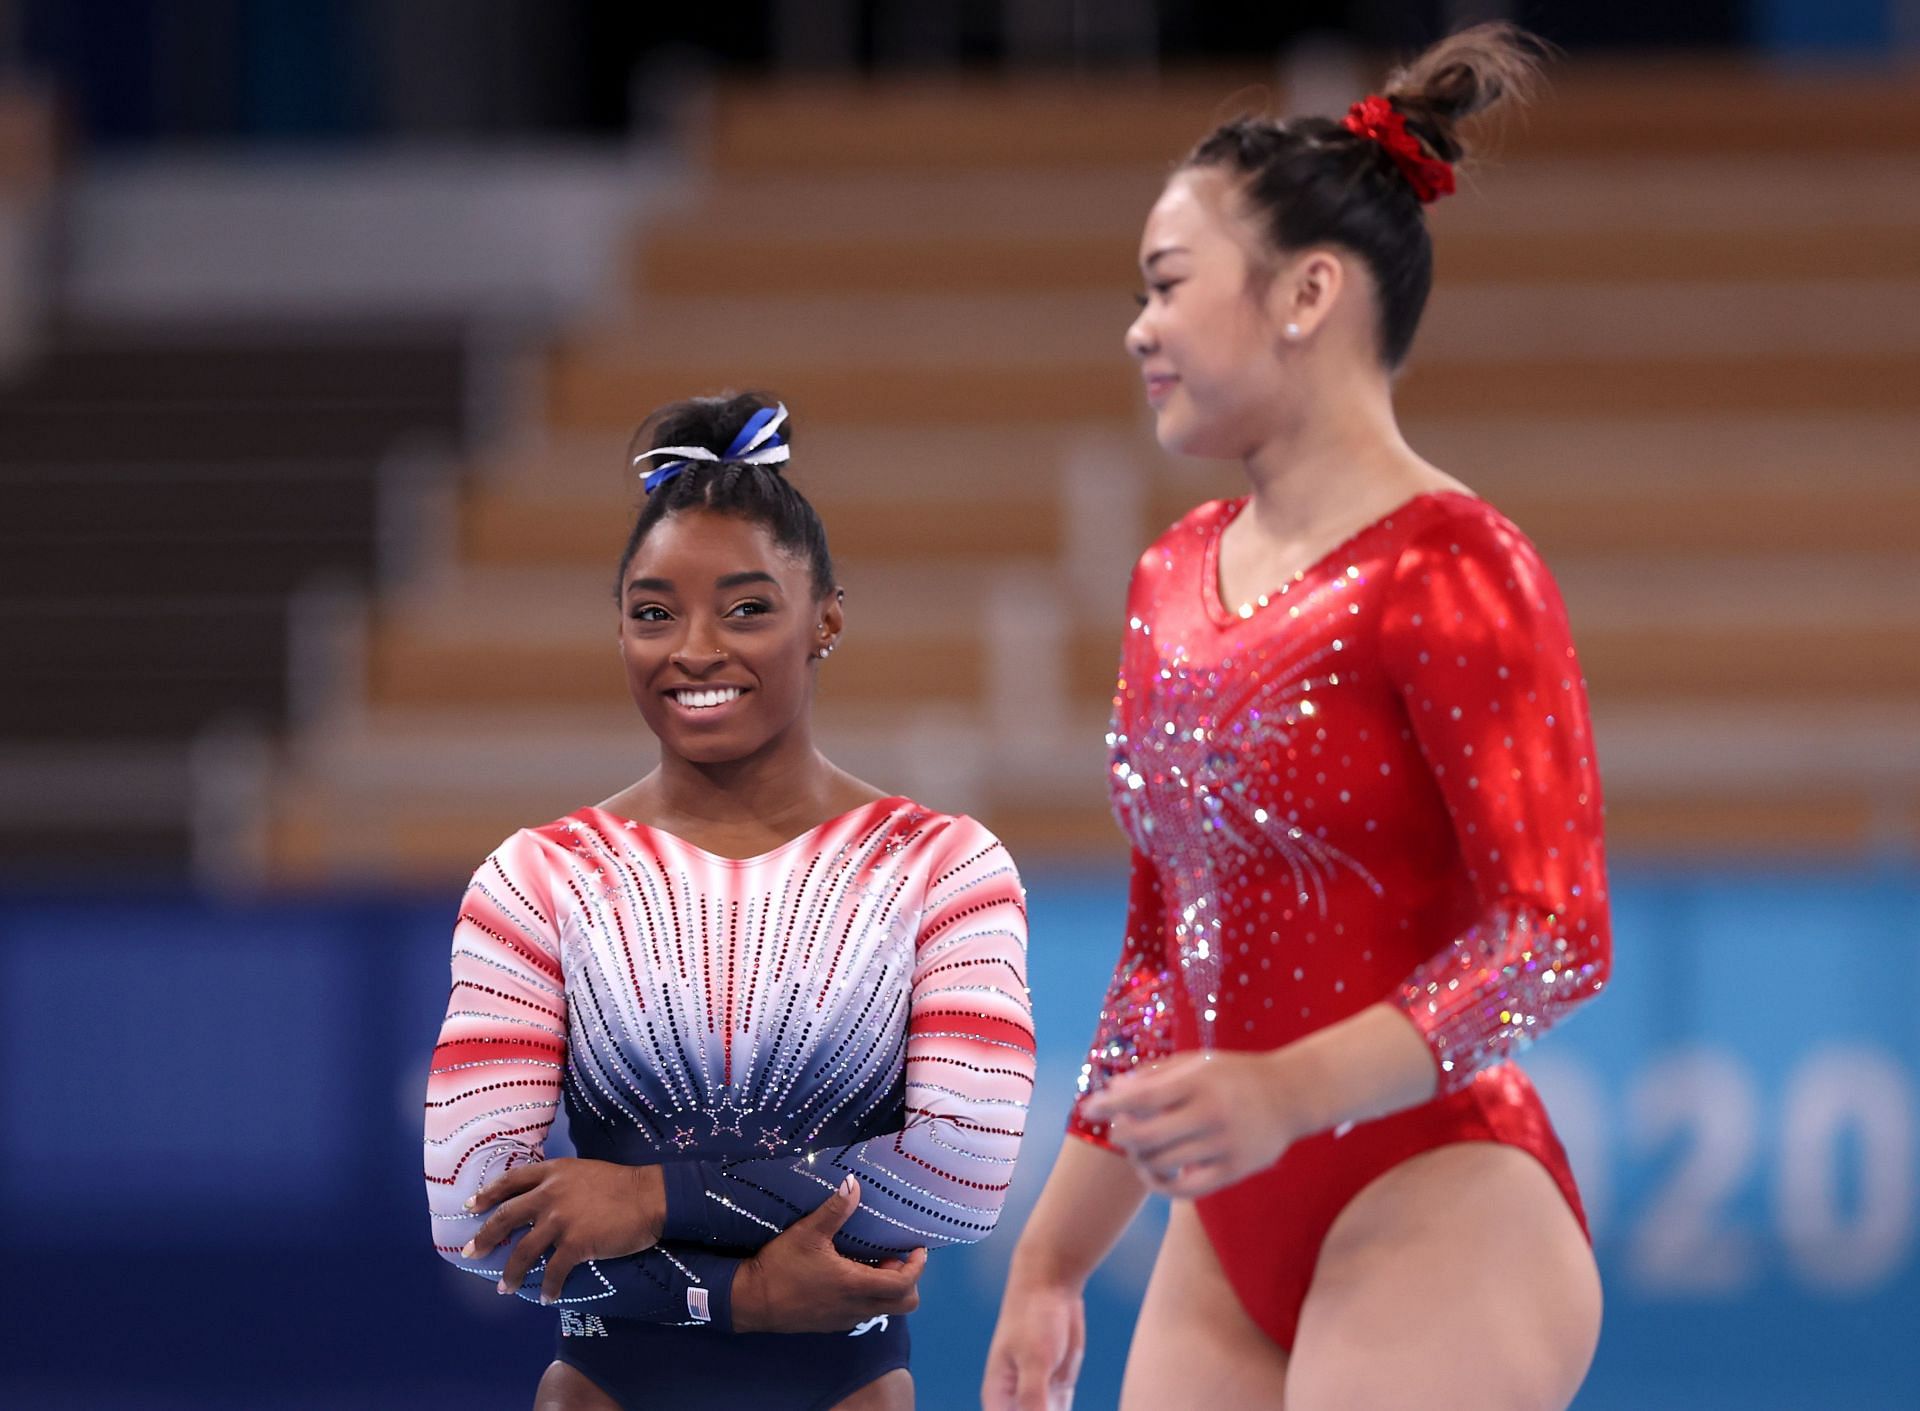 When and Where to watch Simone Biles and Sunisa Lee's comeback at the